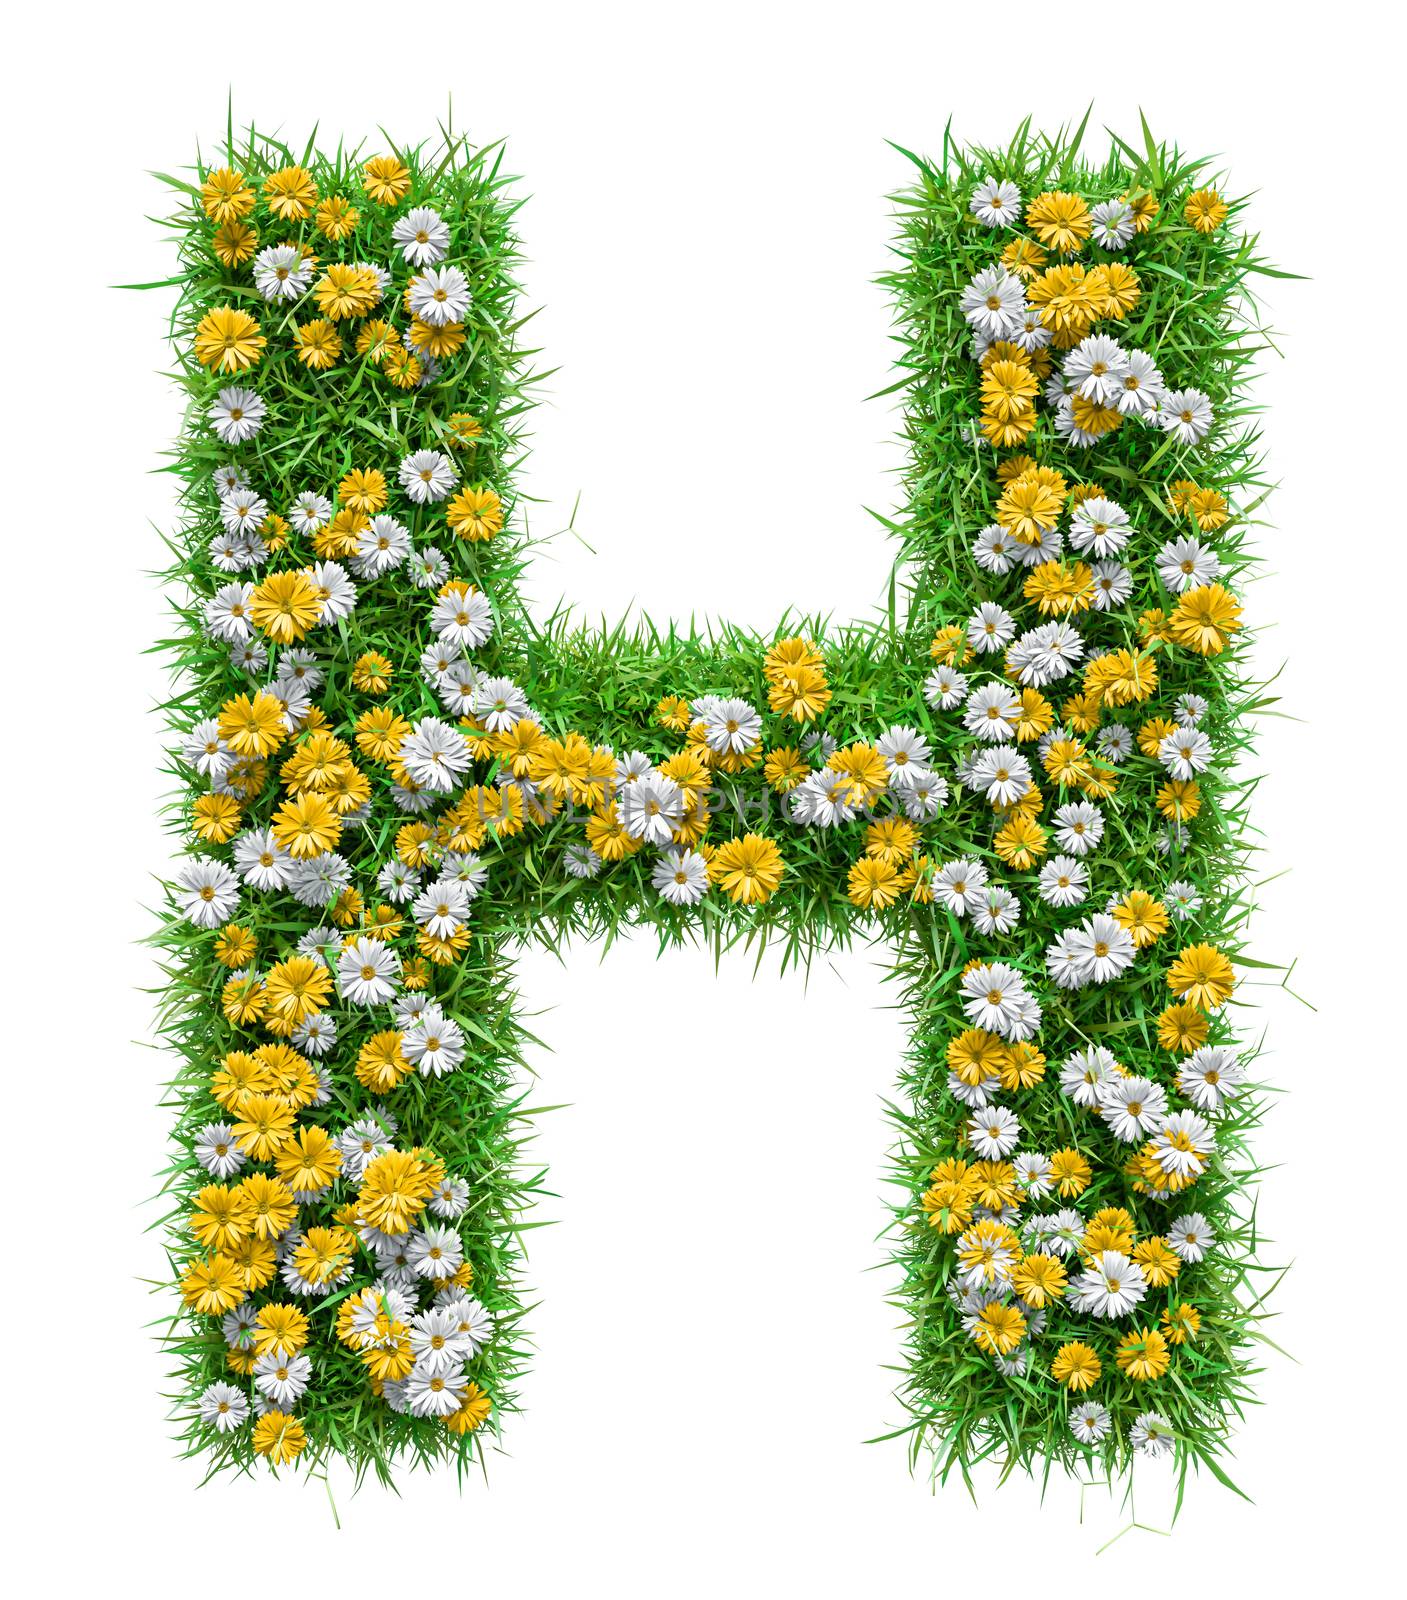 Letter H Of Green Grass And Flowers. Isolated On White Background. Font For Your Design. 3D Illustration